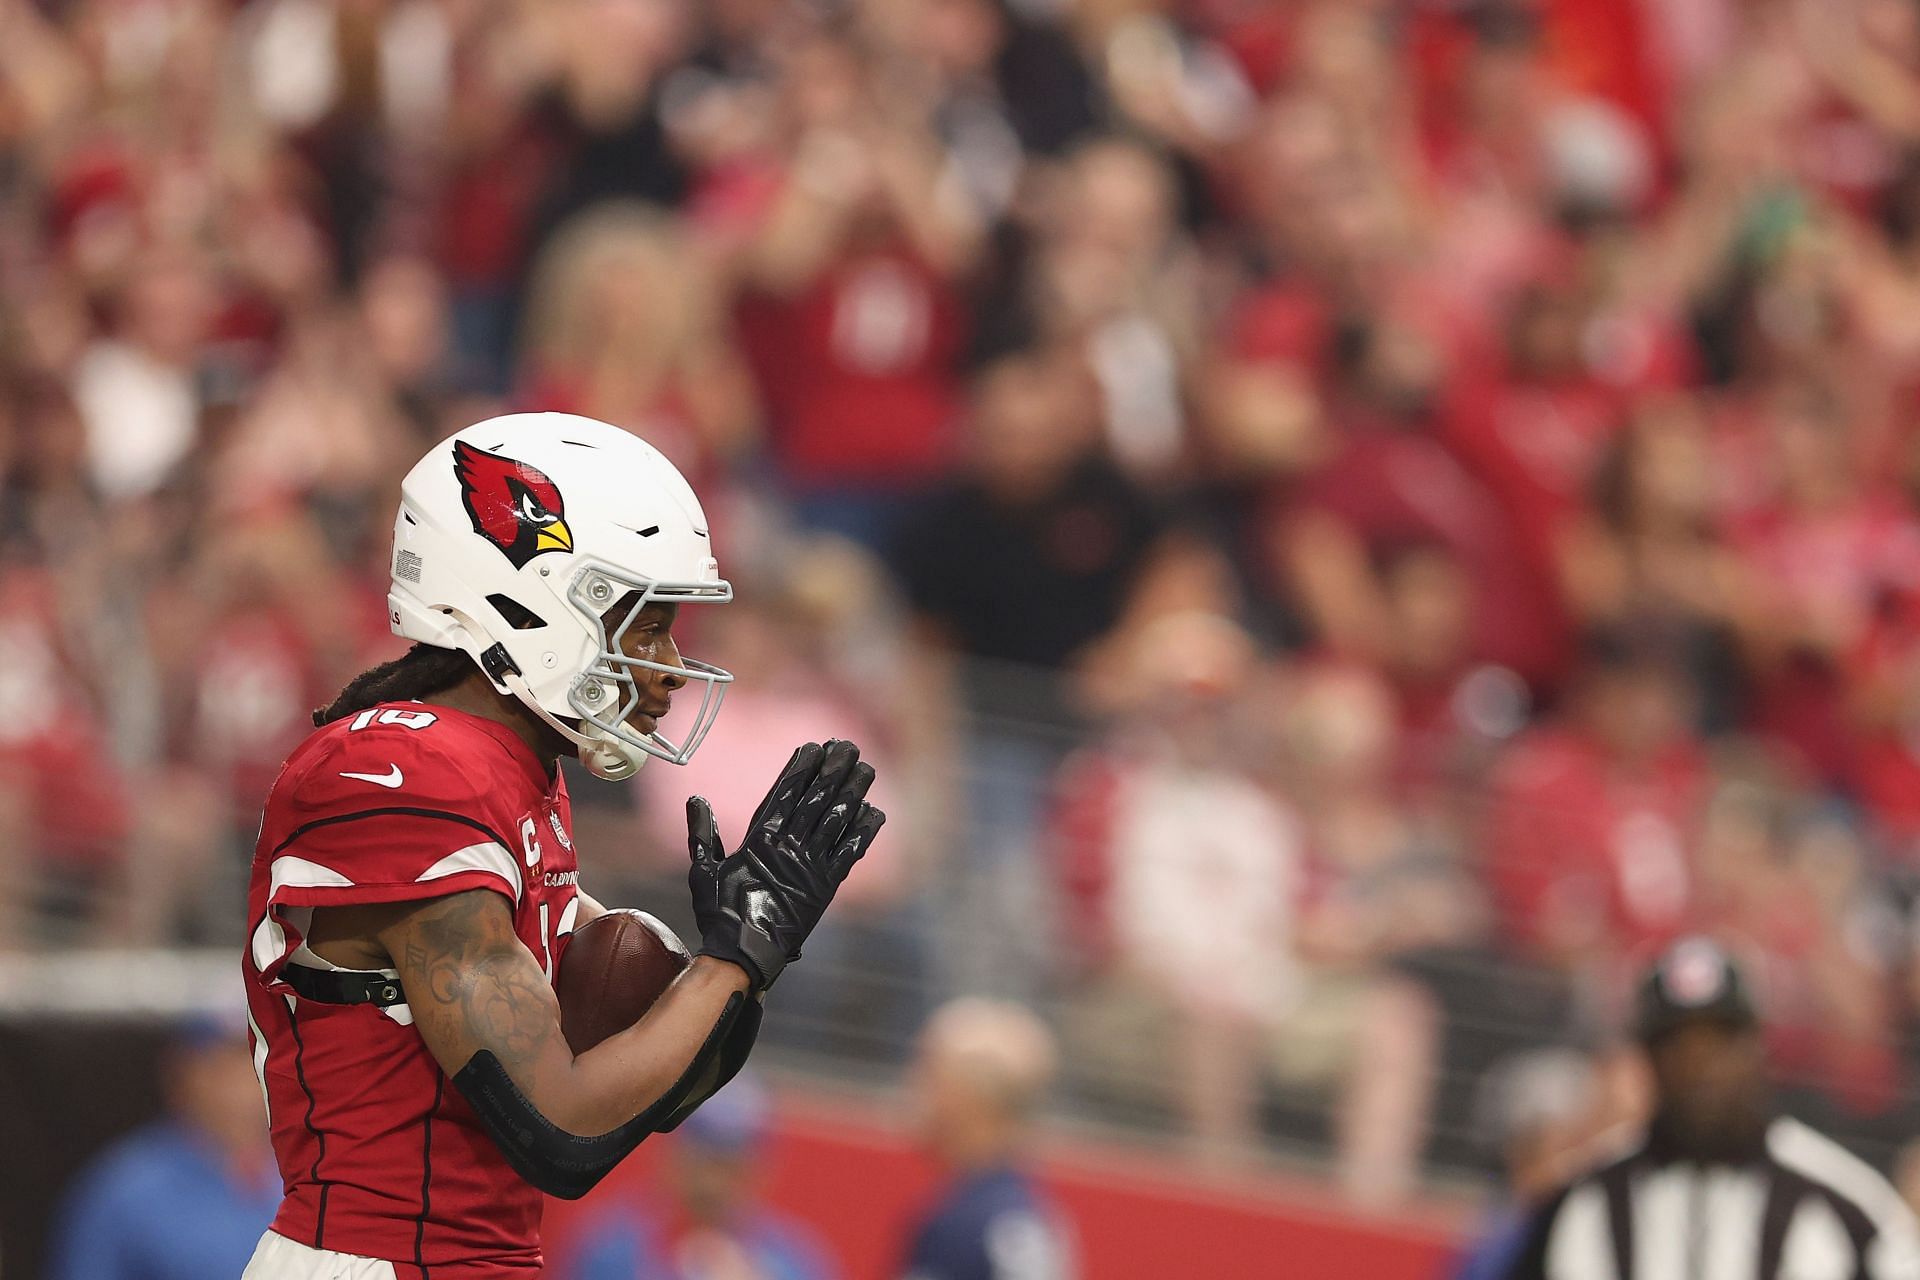 Arizona Cardinals will be without their star player DeAndre Hopkins for the start of the 2022 NFL season